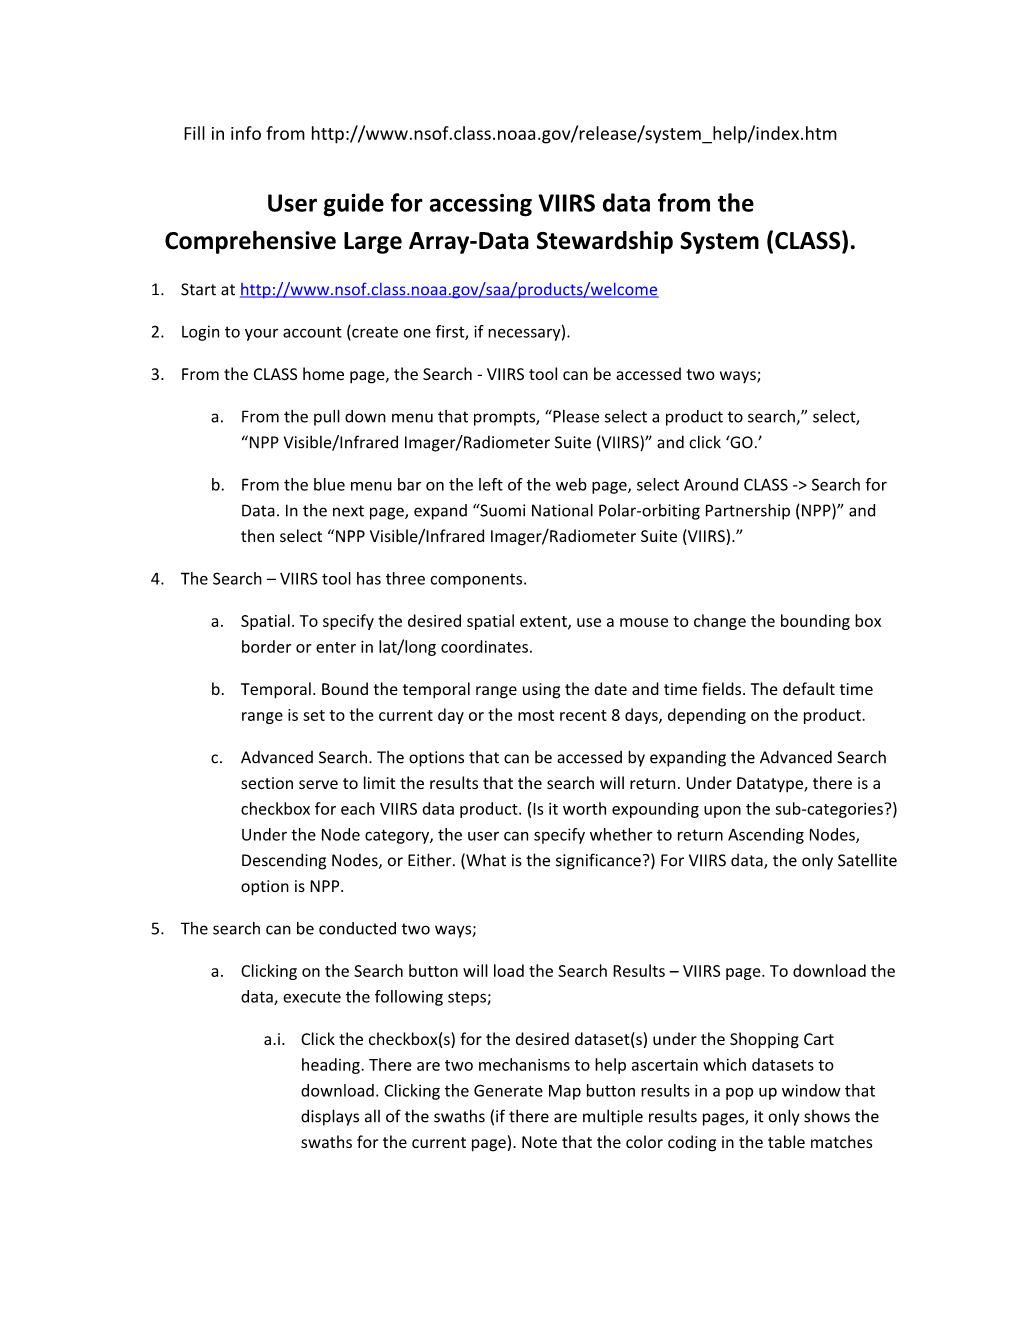 User Guide for Accessing VIIRS Data from The